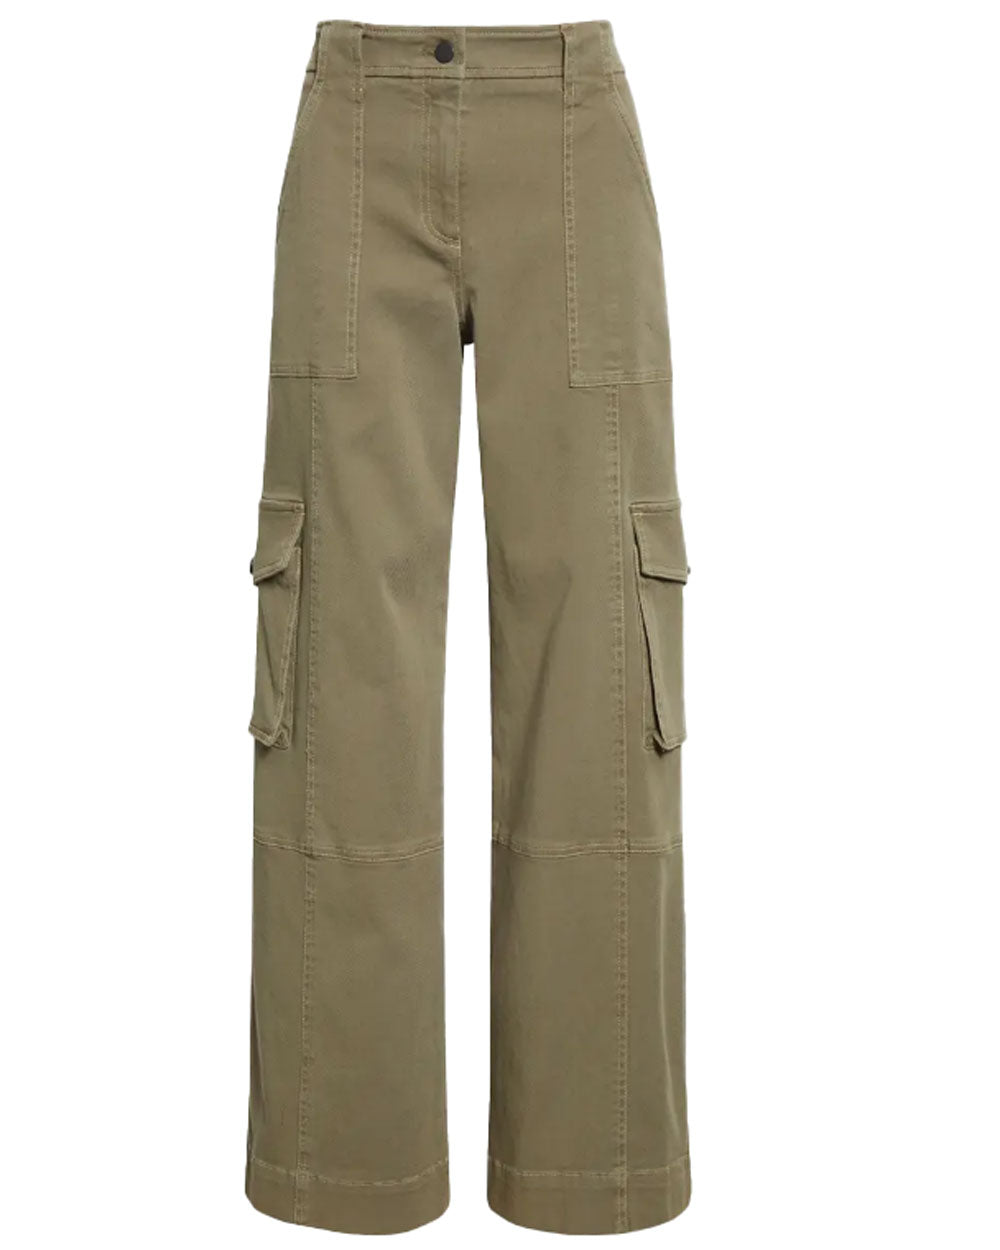 Dark Olive Coop Pant with Cargo Pockets